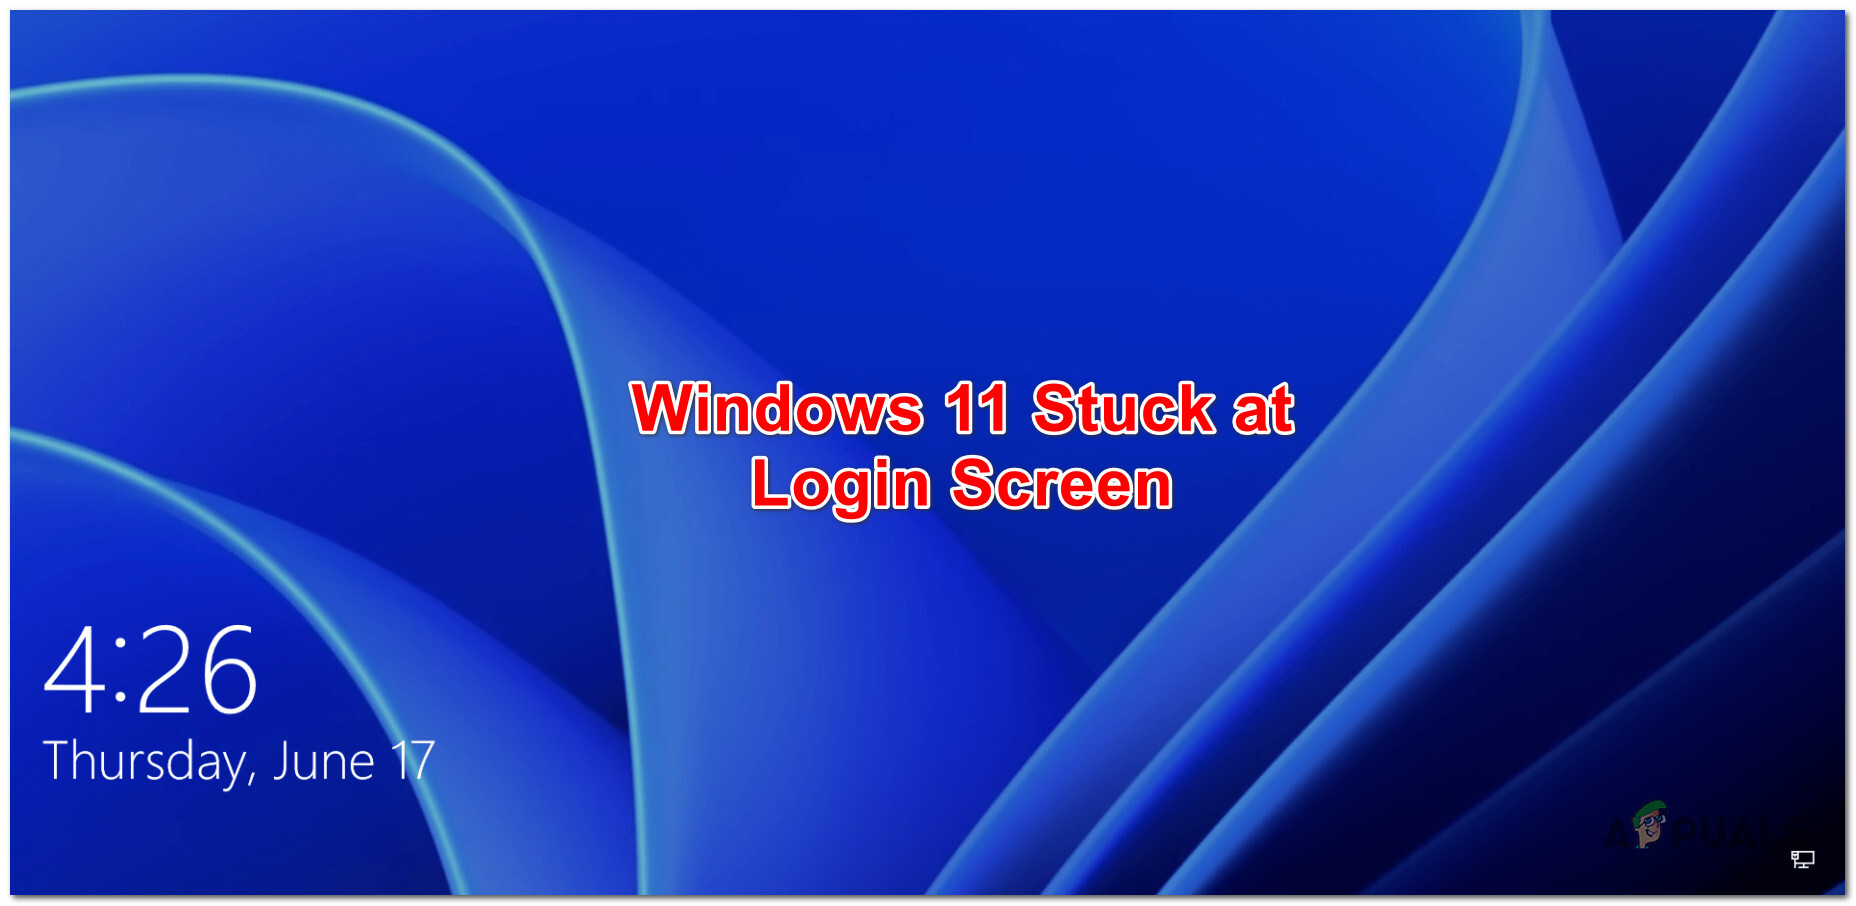 Stuck at Lock Screen on Windows 11? Here's the Fix: